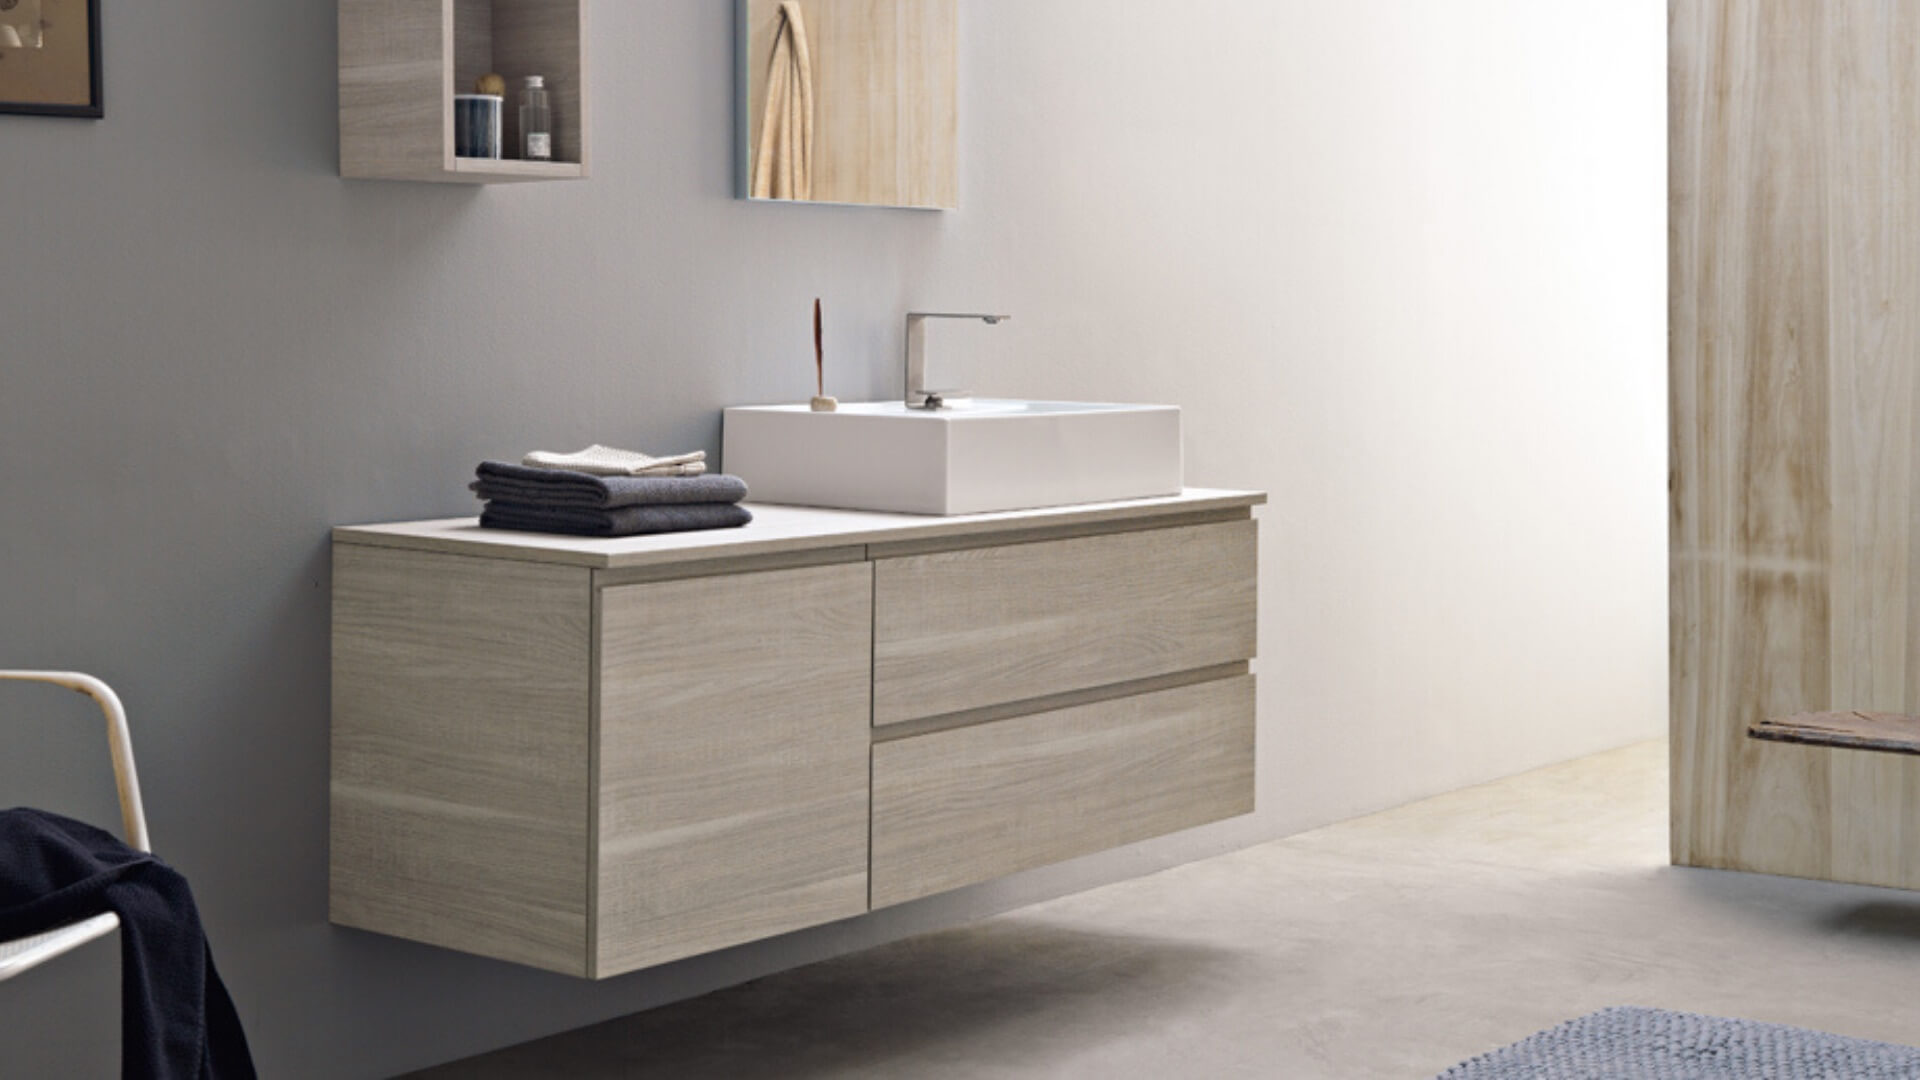 Blog IDW - 7 suggestions for furnishing your bathroom